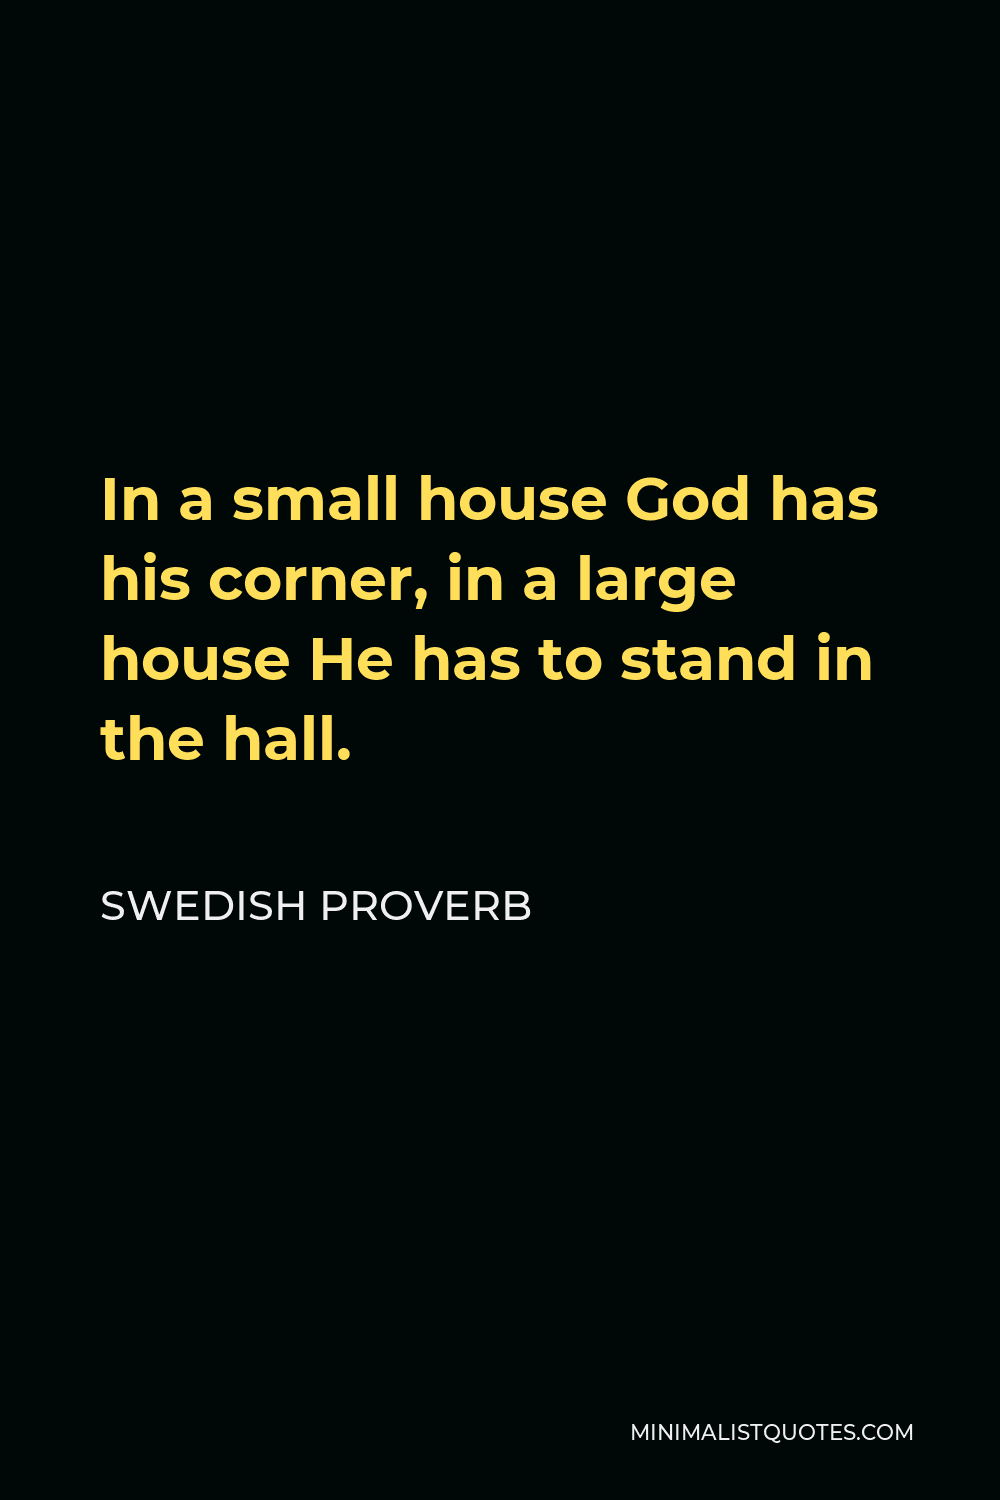 Swedish Proverb Quote - In a small house God has his corner, in a large house He has to stand in the hall.